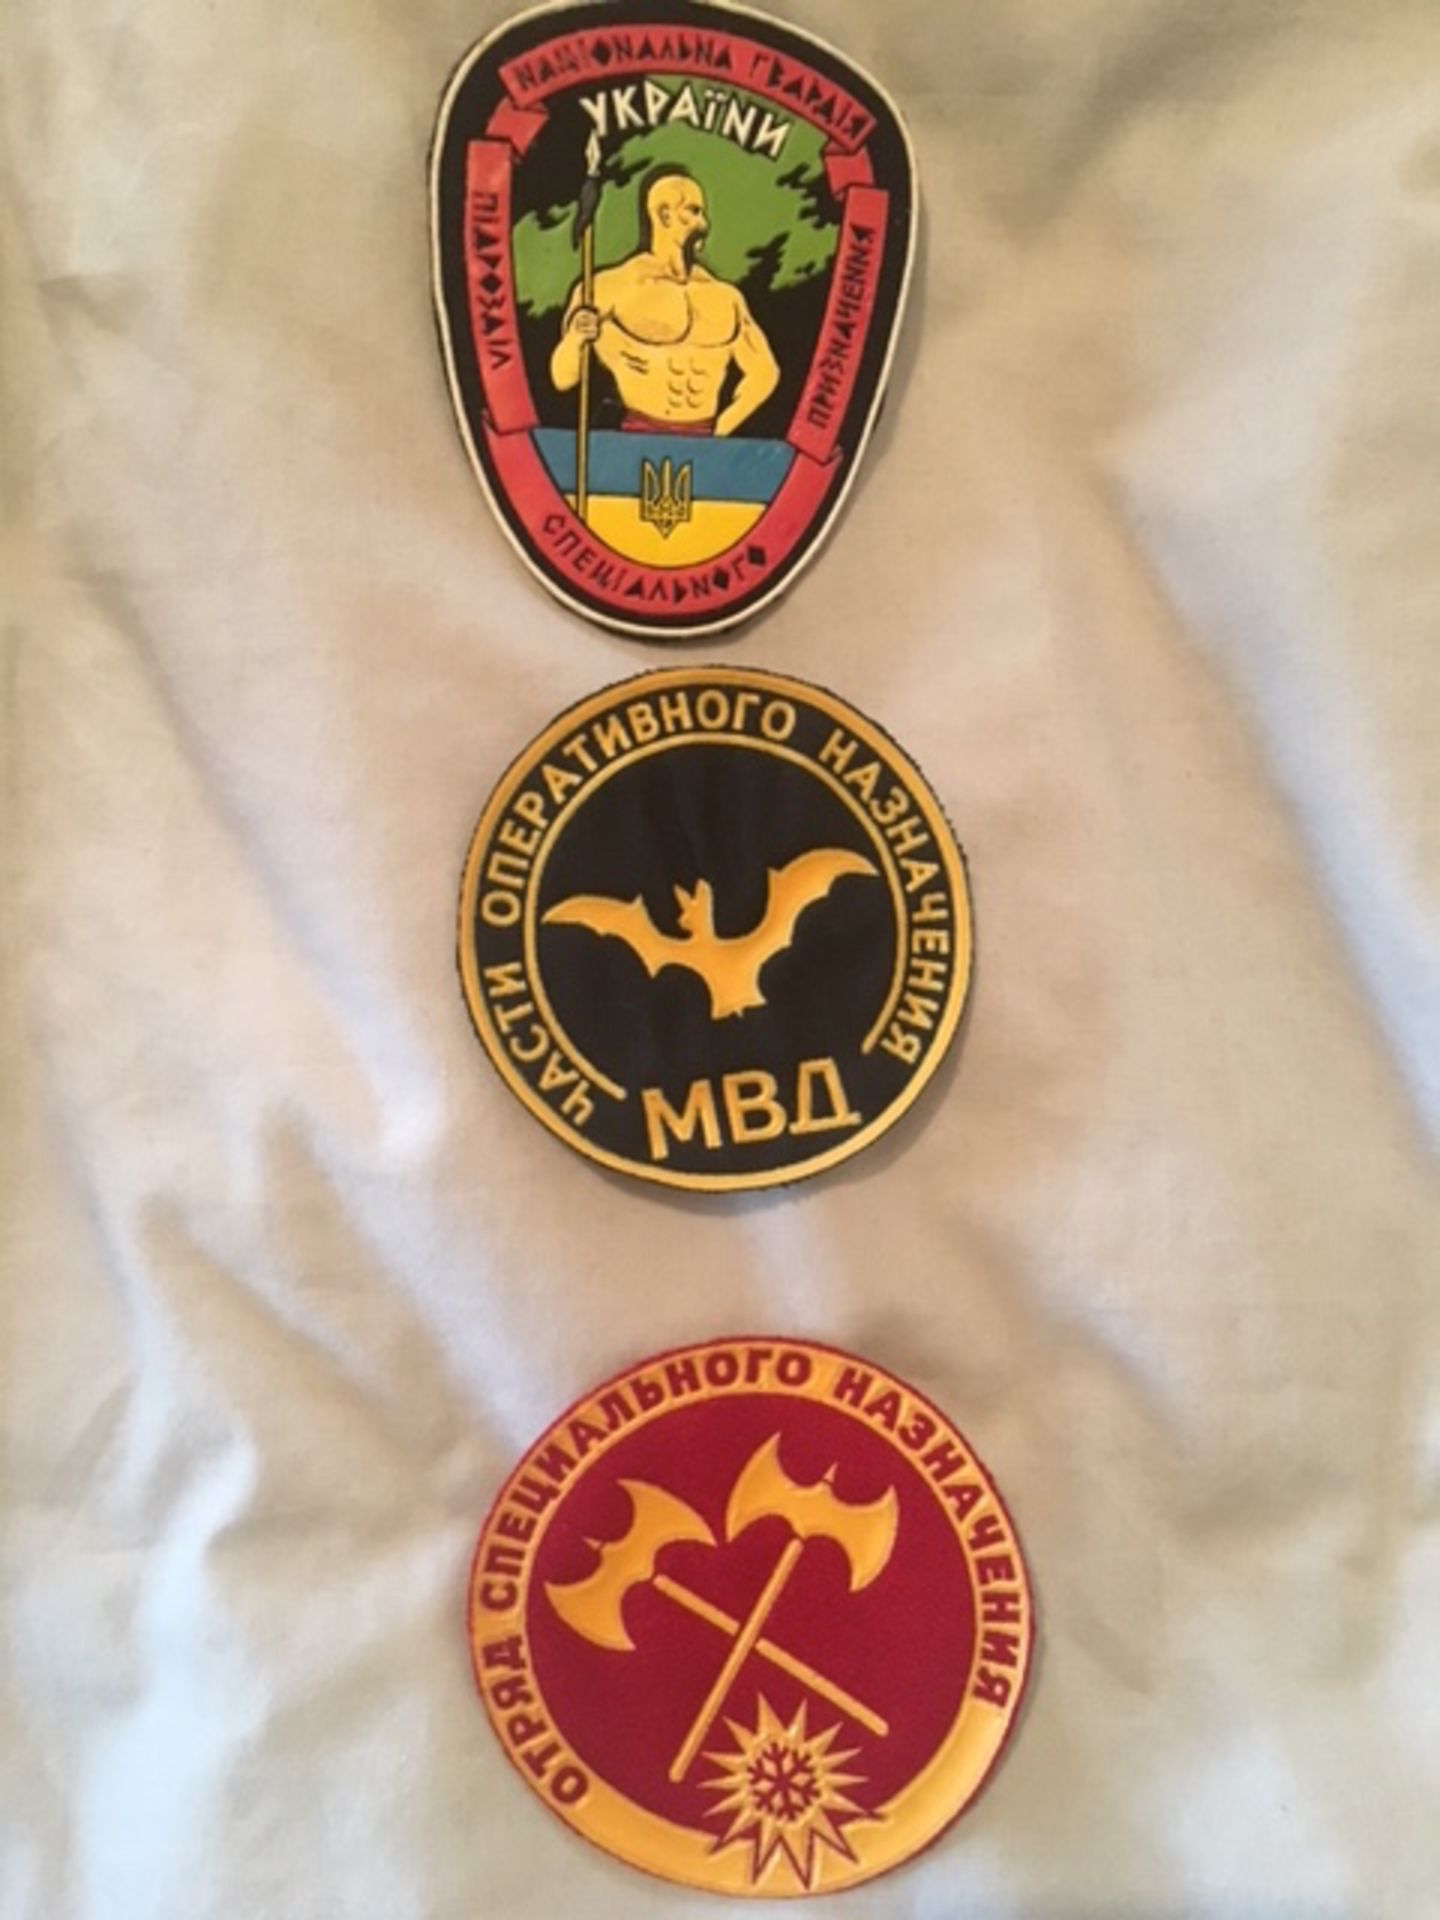 russian/ukrainian special forces insignia - Image 2 of 2